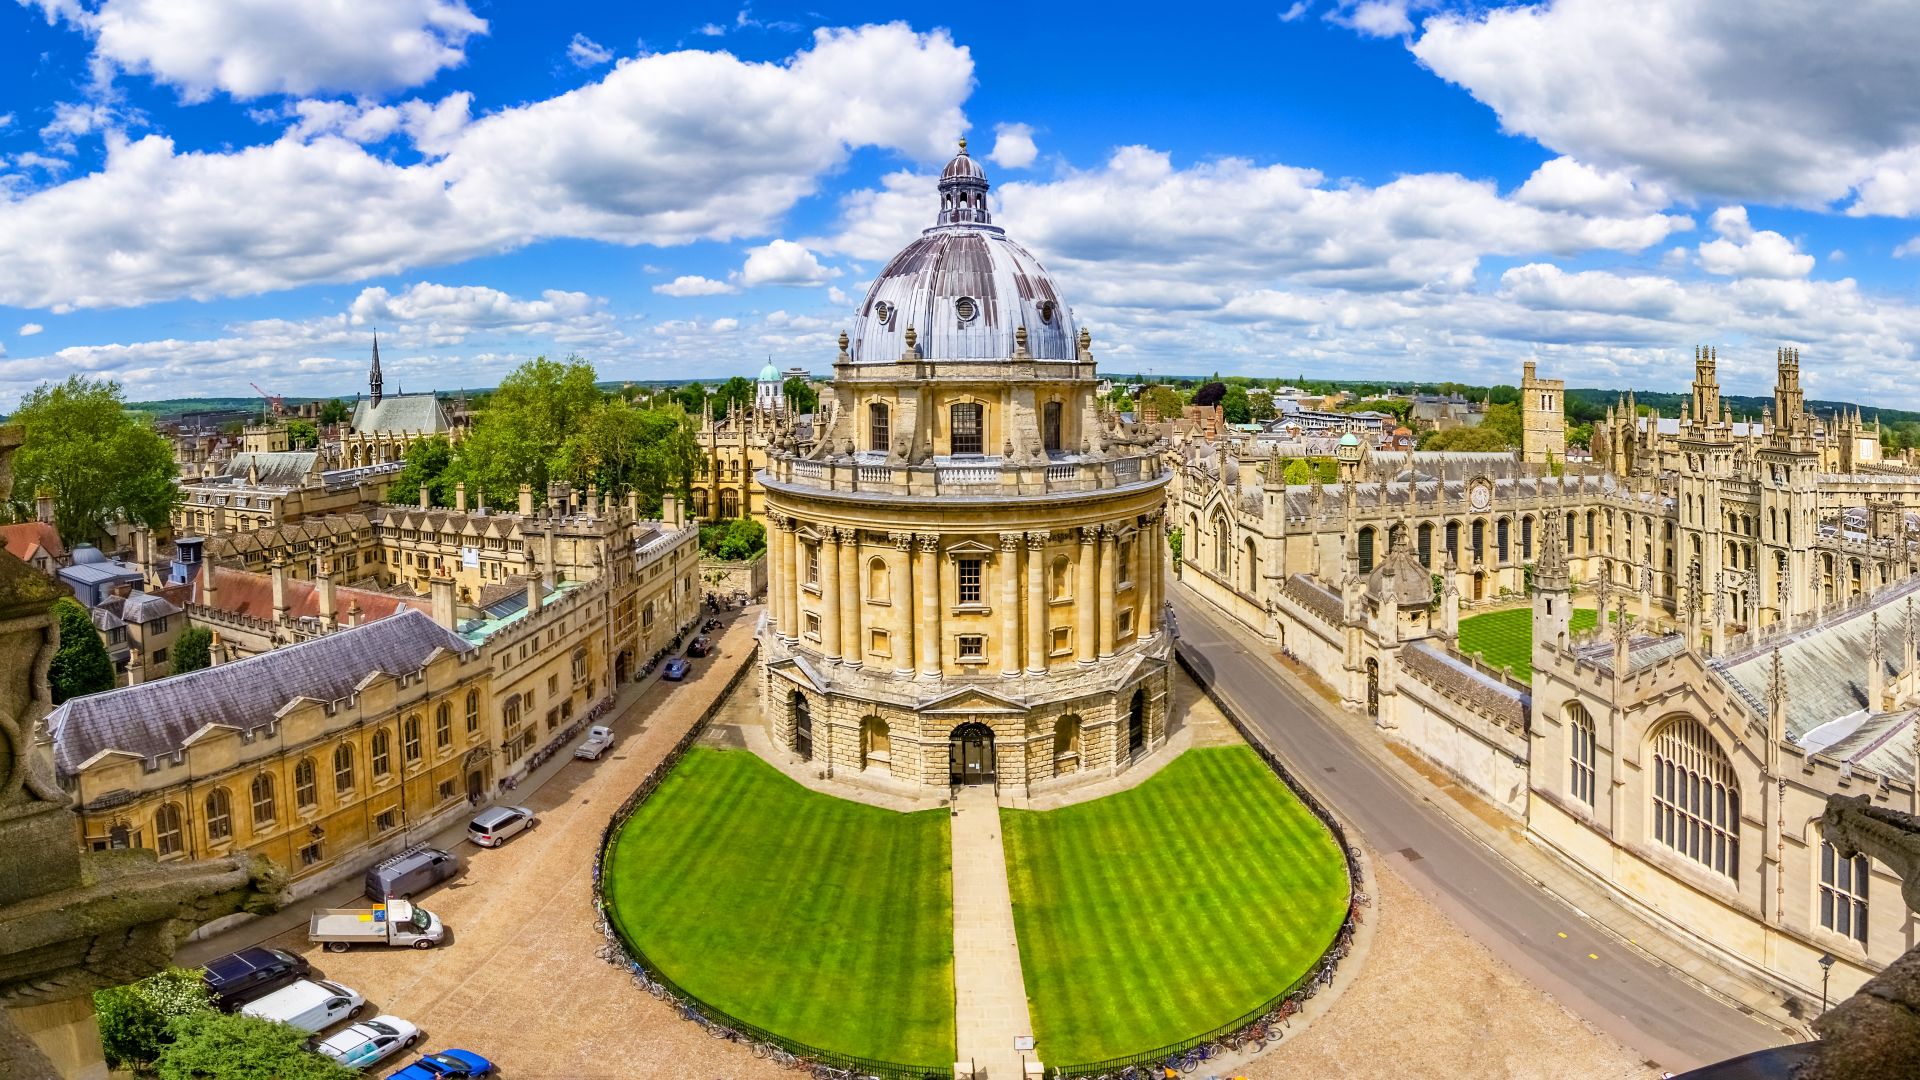 Streets of Oxford-landmark, England - overview from a church's tower with the Bodleian Libraryand All Souls College